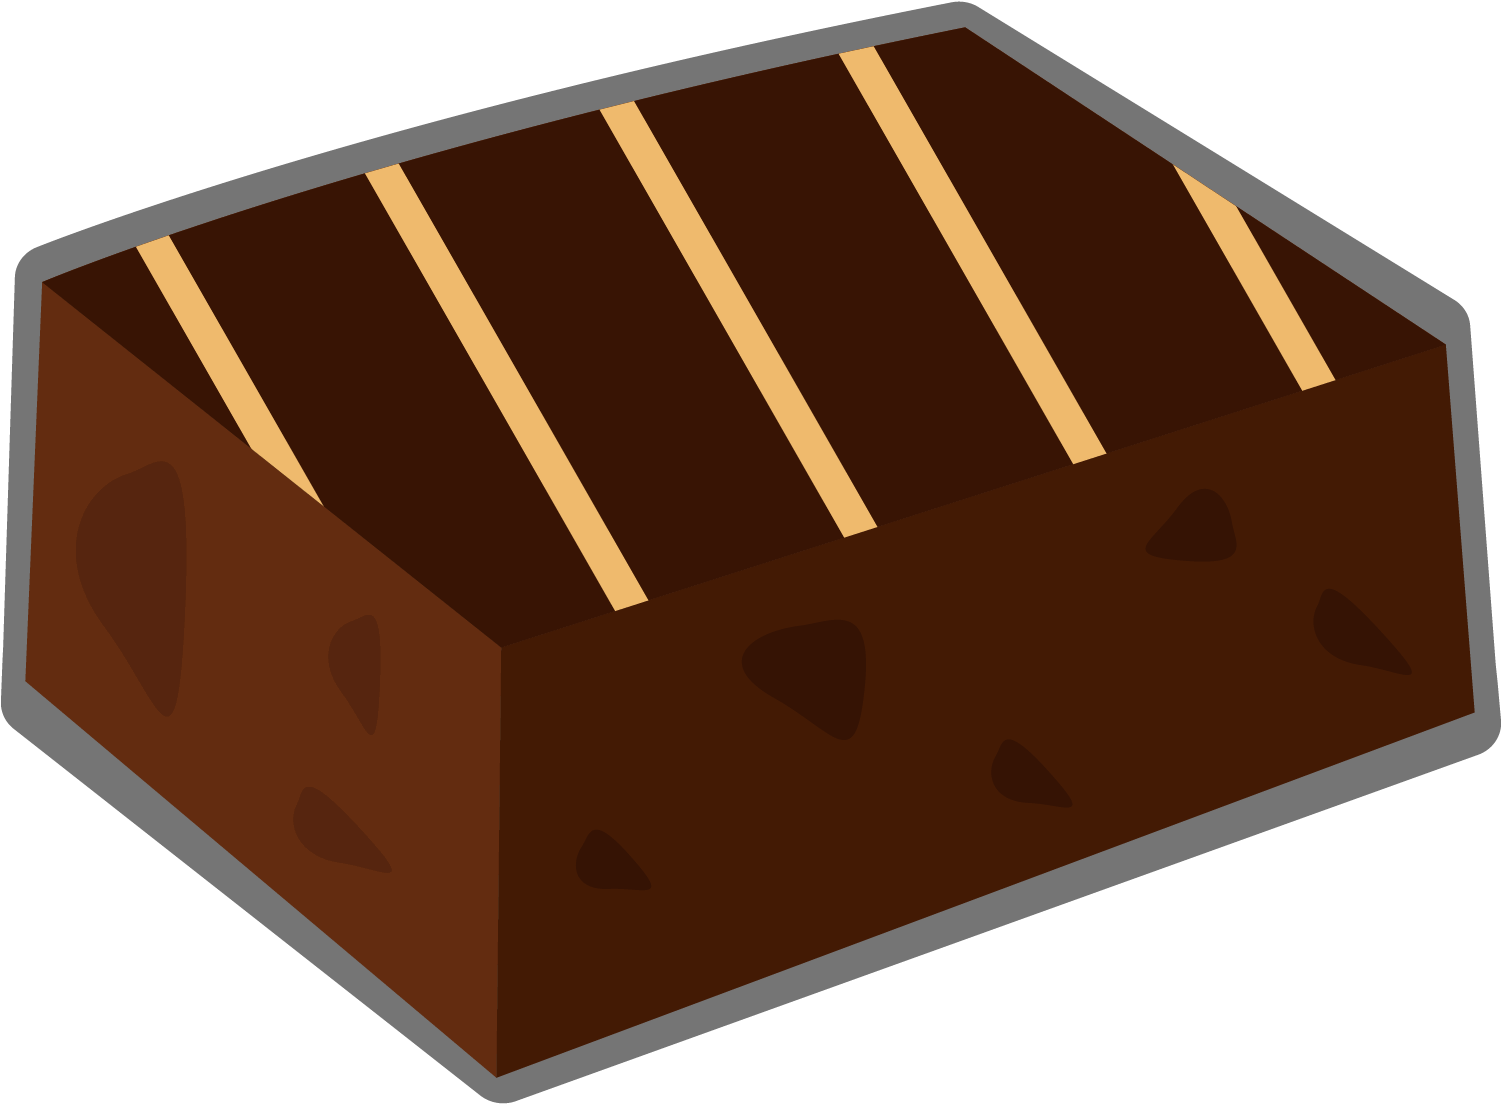 A Chocolate Bar With Brown Stripes